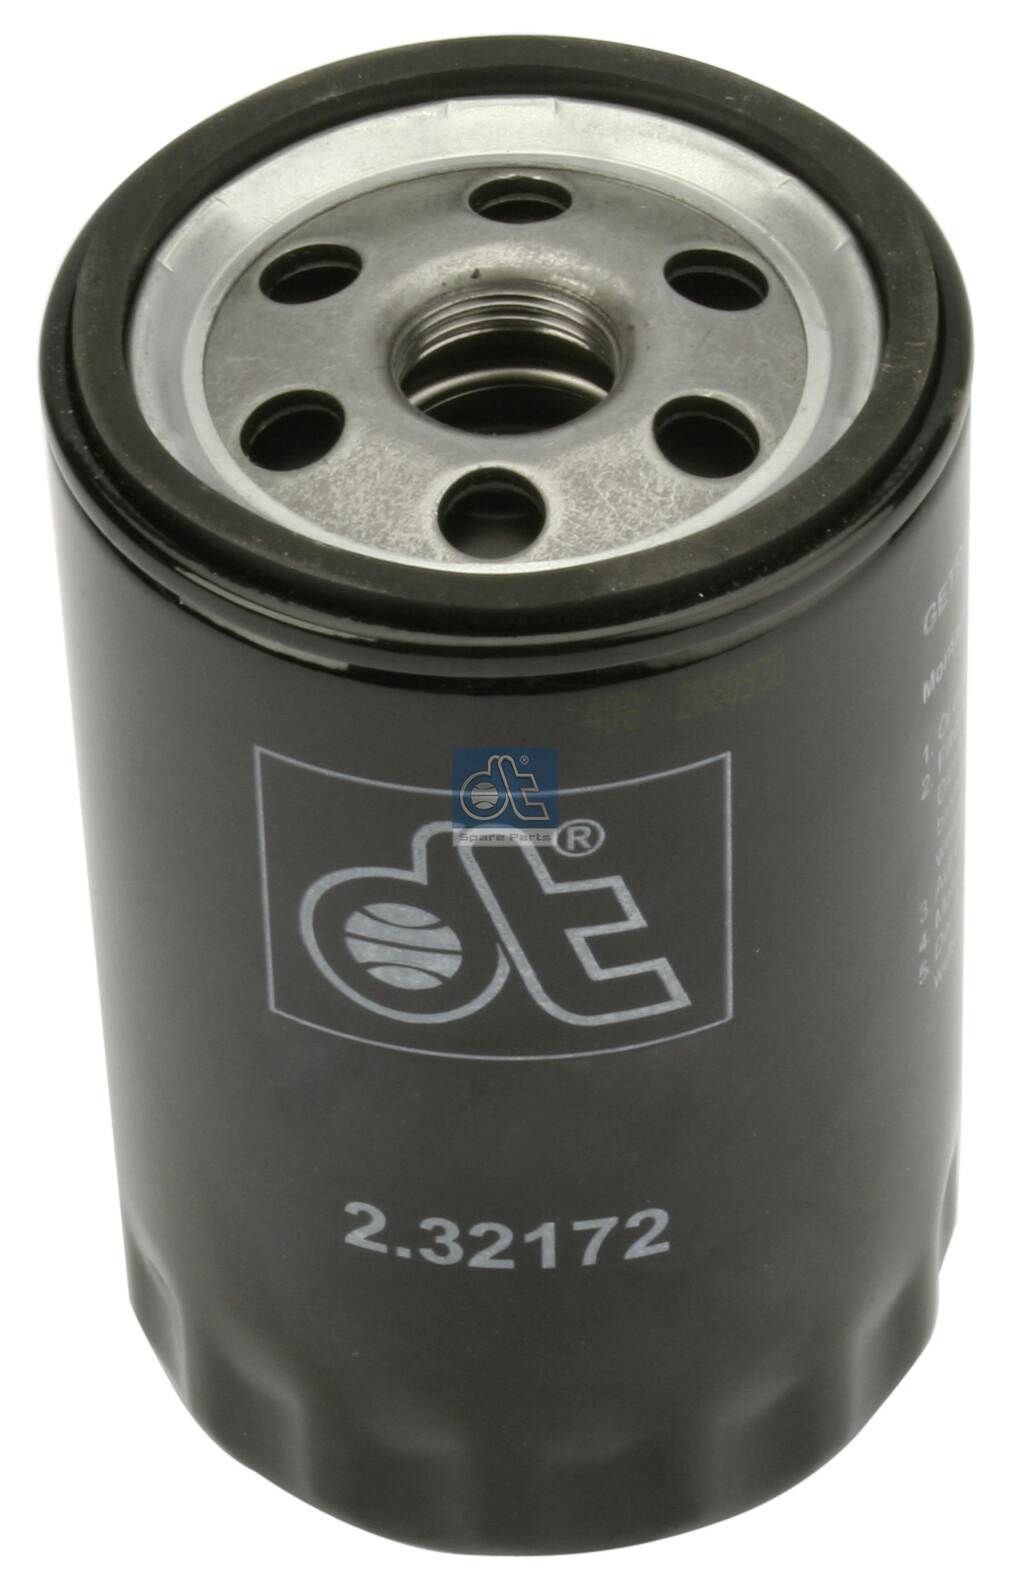 H14W02 DT Spare Parts 2.32172 Oil filter 15213 3243 0